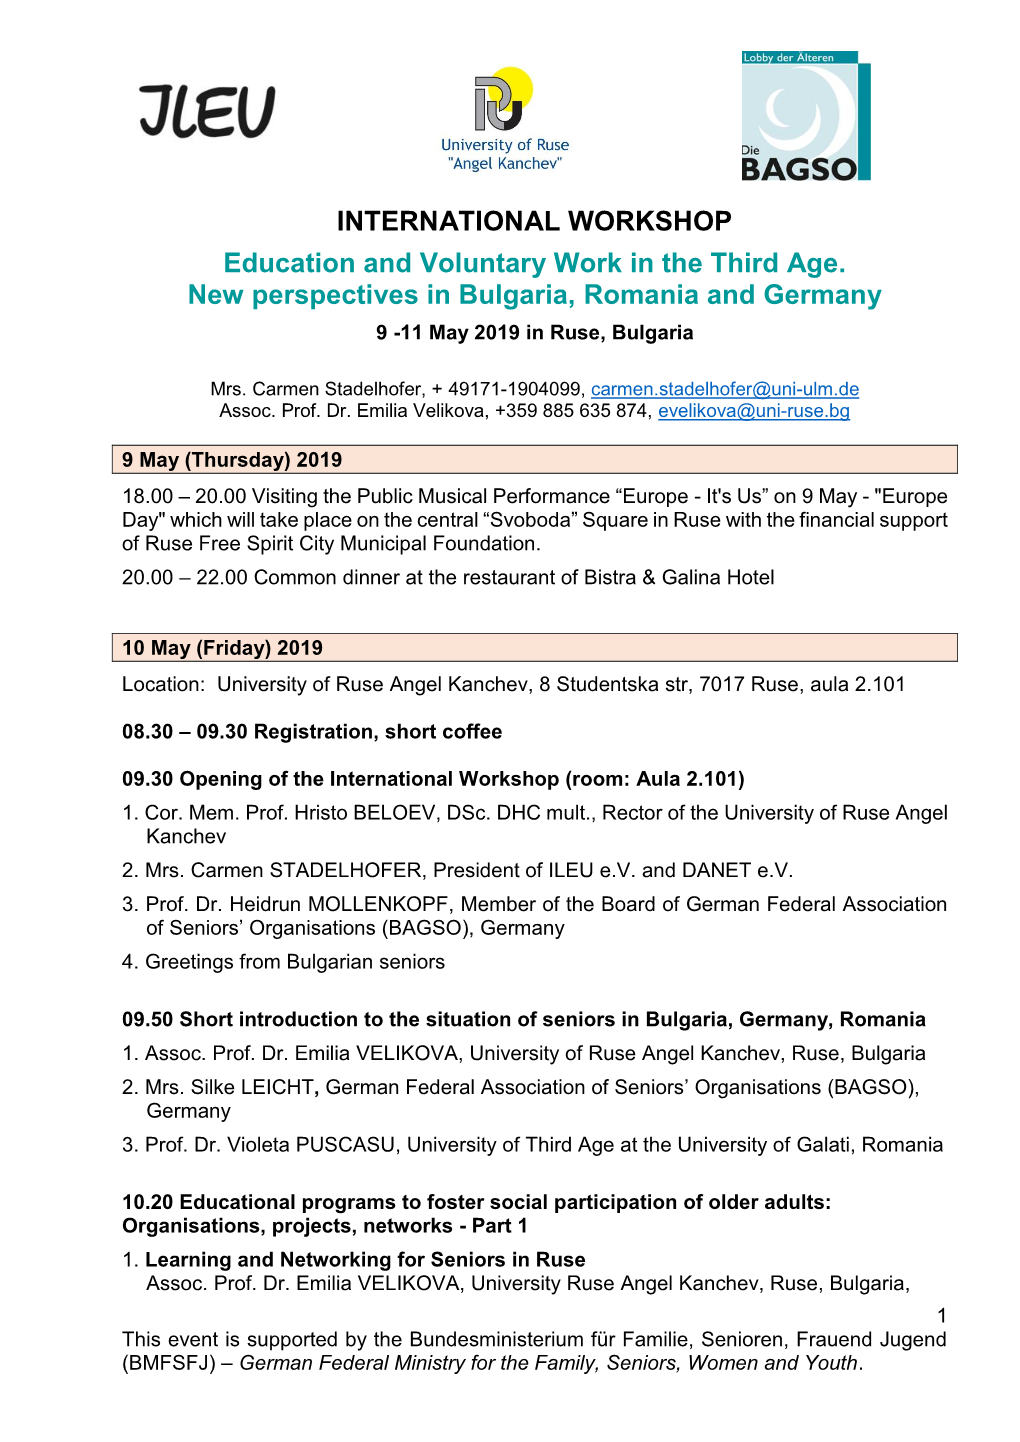 INTERNATIONAL WORKSHOP Education and Voluntary Work in the Third Age